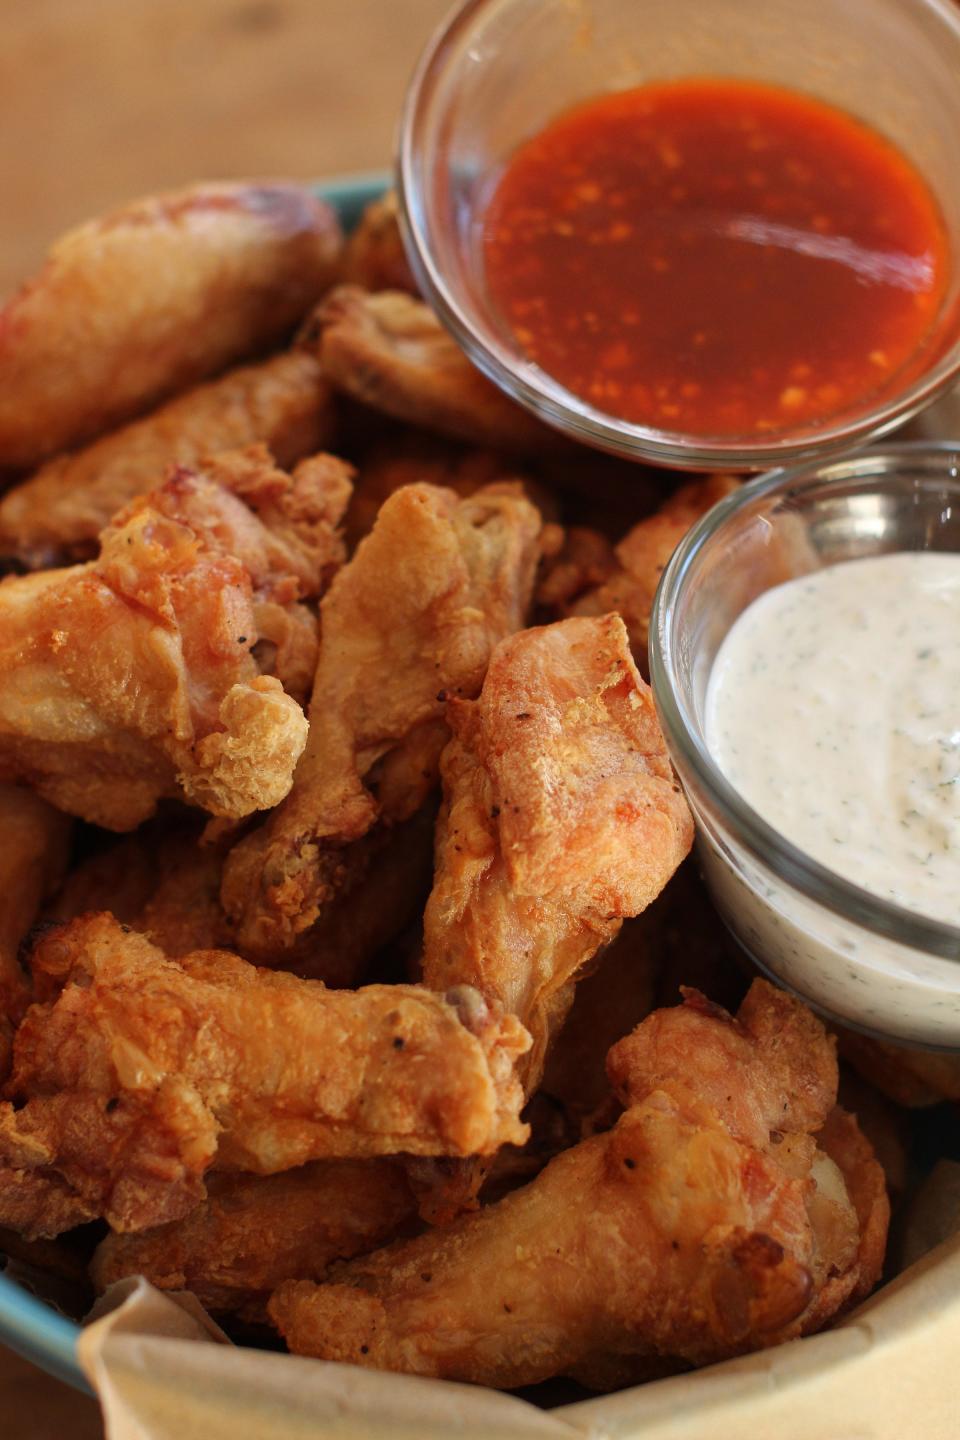 With supply at its highest levels since the beginning of 2019, the price of chicken wings has dropped.